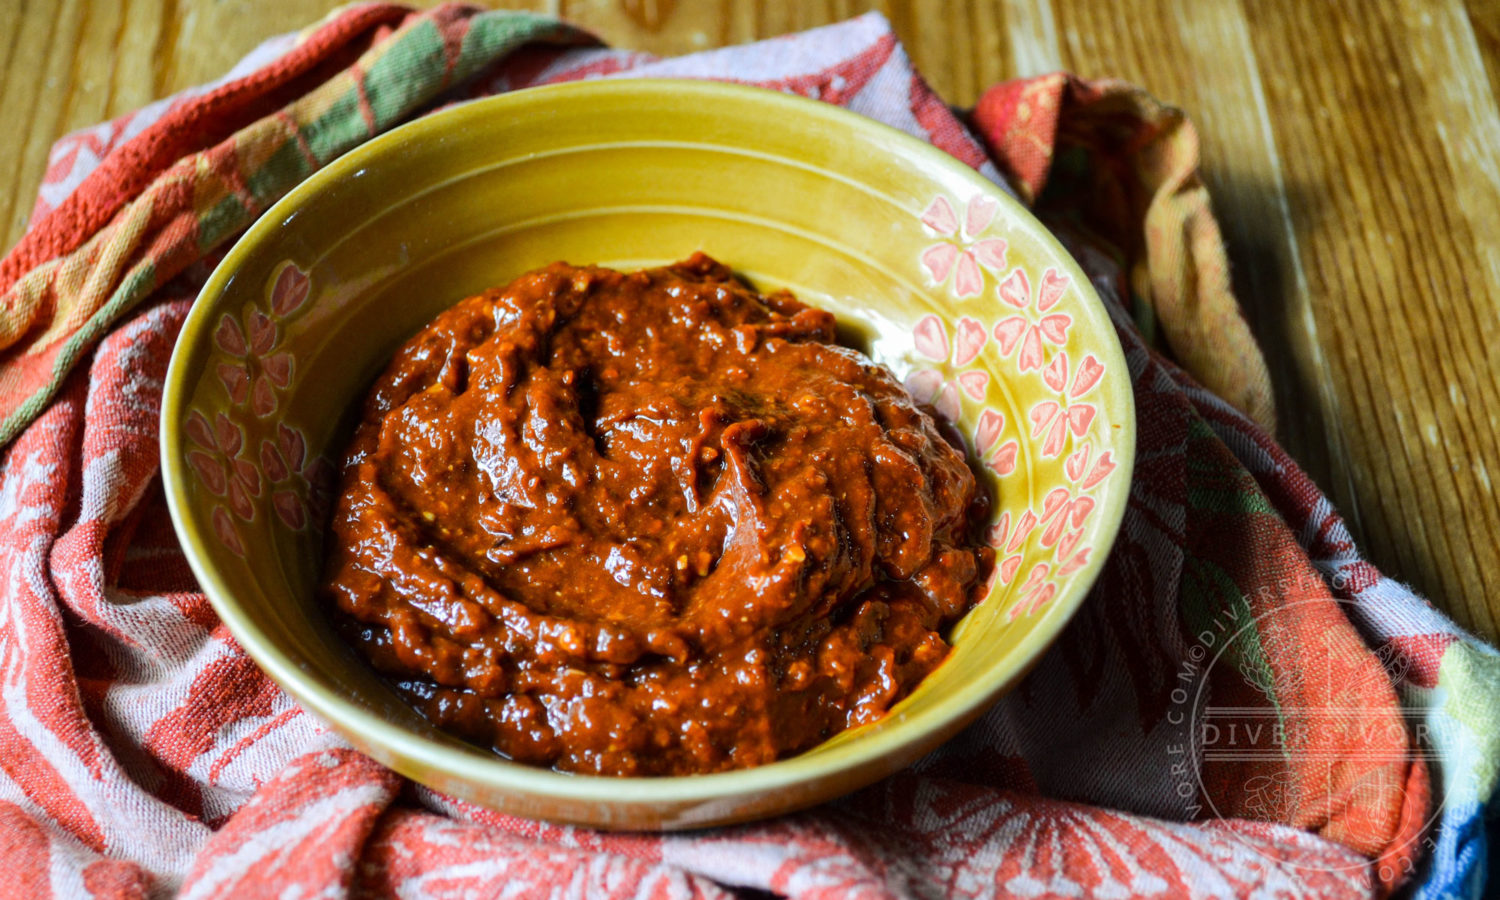 K'uut Bi Ik (Dried Chili Salsa) made with morita chipotles for a smoky and delicious twist on the Yucatecan classic - Diversivore.com